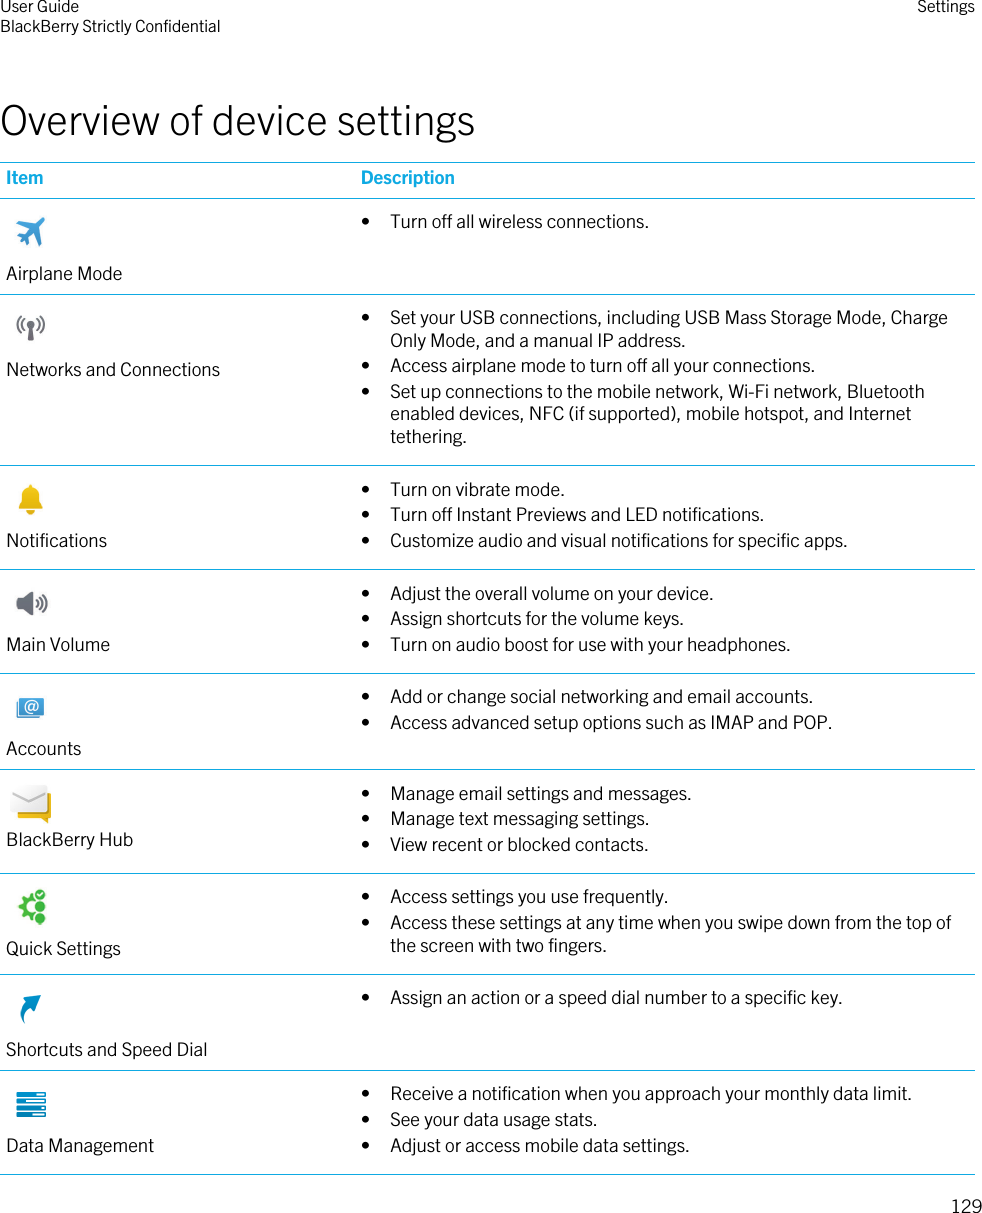 Overview of device settingsItem DescriptionAirplane Mode• Turn off all wireless connections.Networks and Connections• Set your USB connections, including USB Mass Storage Mode, Charge Only Mode, and a manual IP address.• Access airplane mode to turn off all your connections.• Set up connections to the mobile network, Wi-Fi network, Bluetooth enabled devices, NFC (if supported), mobile hotspot, and Internet tethering.Notifications• Turn on vibrate mode.• Turn off Instant Previews and LED notifications.• Customize audio and visual notifications for specific apps.Main Volume• Adjust the overall volume on your device.• Assign shortcuts for the volume keys.• Turn on audio boost for use with your headphones.Accounts• Add or change social networking and email accounts.• Access advanced setup options such as IMAP and POP.BlackBerry Hub• Manage email settings and messages.• Manage text messaging settings.• View recent or blocked contacts.Quick Settings• Access settings you use frequently.• Access these settings at any time when you swipe down from the top of the screen with two fingers.Shortcuts and Speed Dial• Assign an action or a speed dial number to a specific key.Data Management• Receive a notification when you approach your monthly data limit.• See your data usage stats.• Adjust or access mobile data settings.User GuideBlackBerry Strictly Confidential Settings129